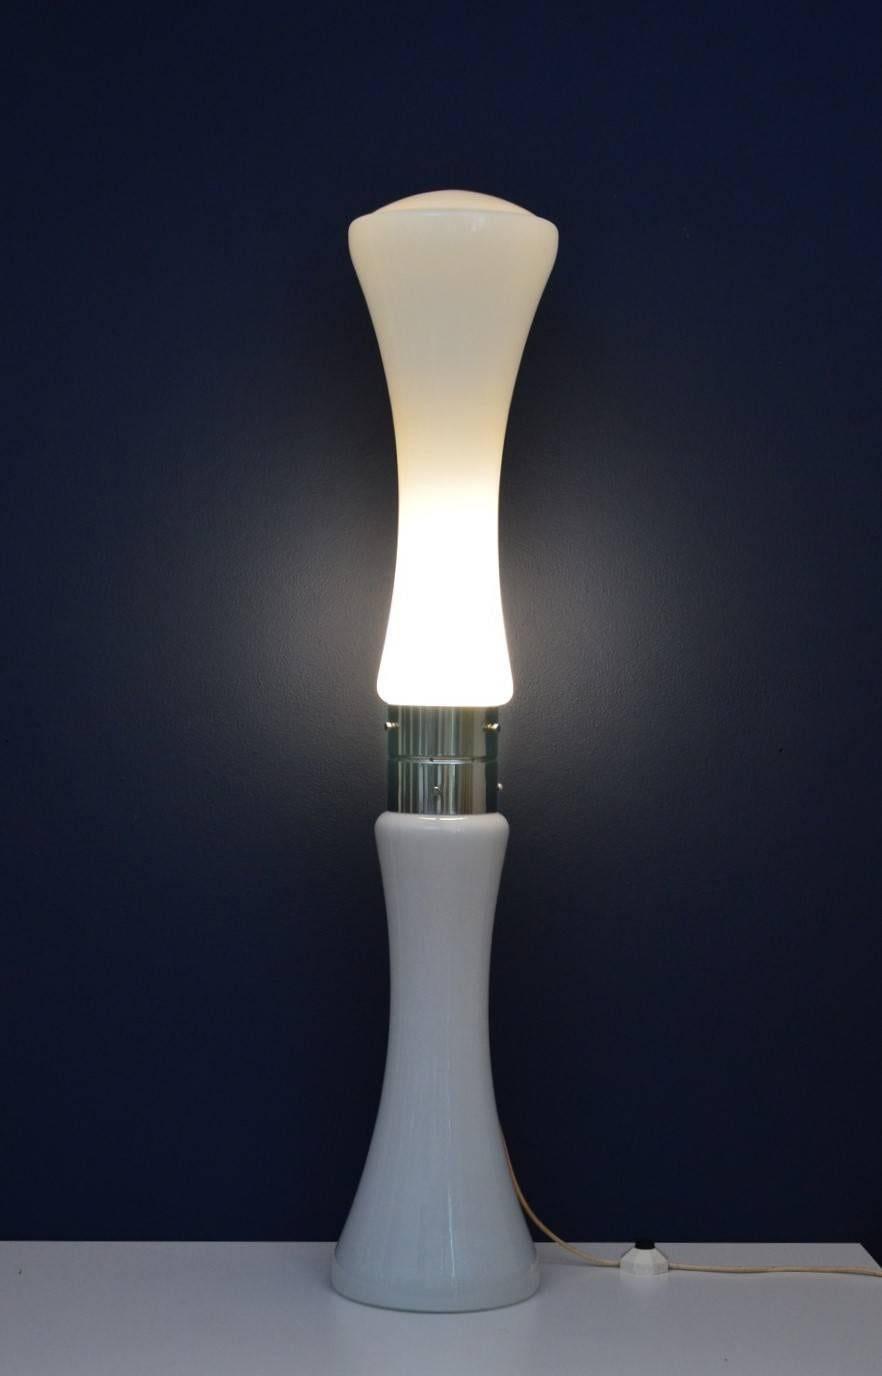 High sculptural illuminated floor lamp in the style of Carlo Nason.
Made of two main Murano made glass bodies and a chromium plated metal part in the middle of the glasses, where are placed the bulbs inside and fixed the wire.
The lamp could be